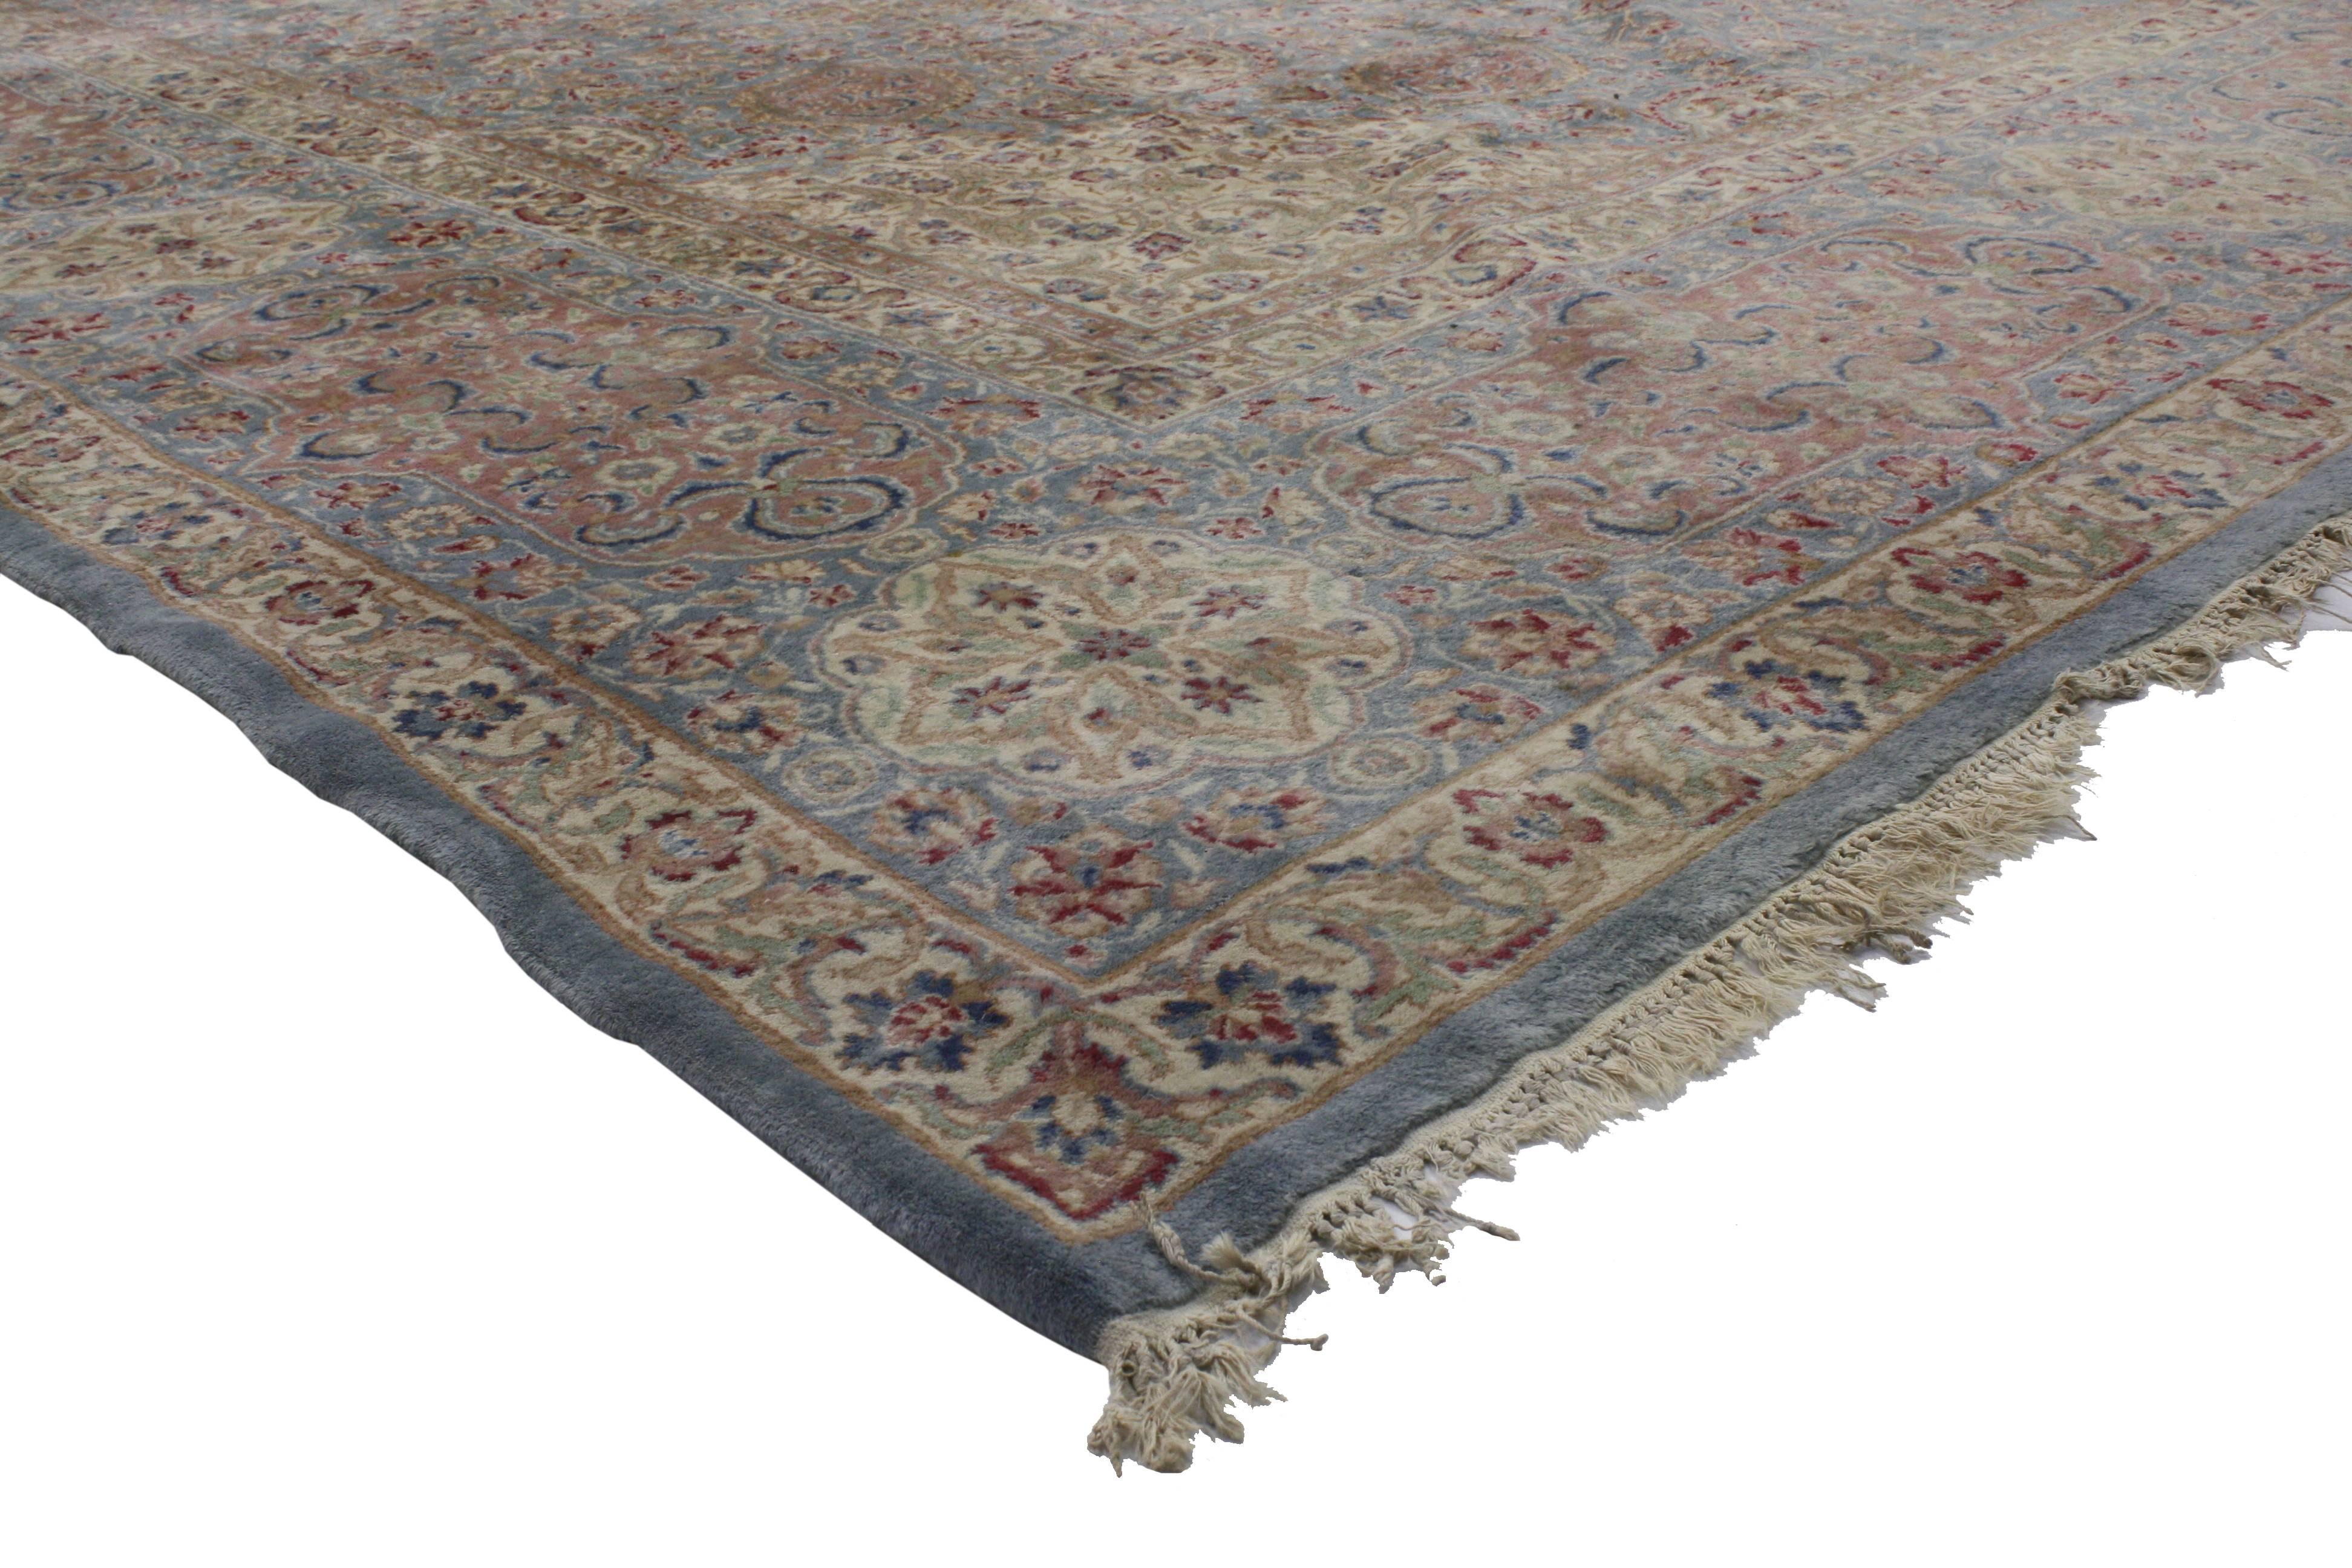 76599 Vintage Persian Kerman Rug 13'09 x 23'02.
This hand knotted wool vintage Persian Kerman rug features a sixteen point cusped medallion flanked by a ring of sixteen pointed ovals surrounded by an all-over floral pattern composed of blooming